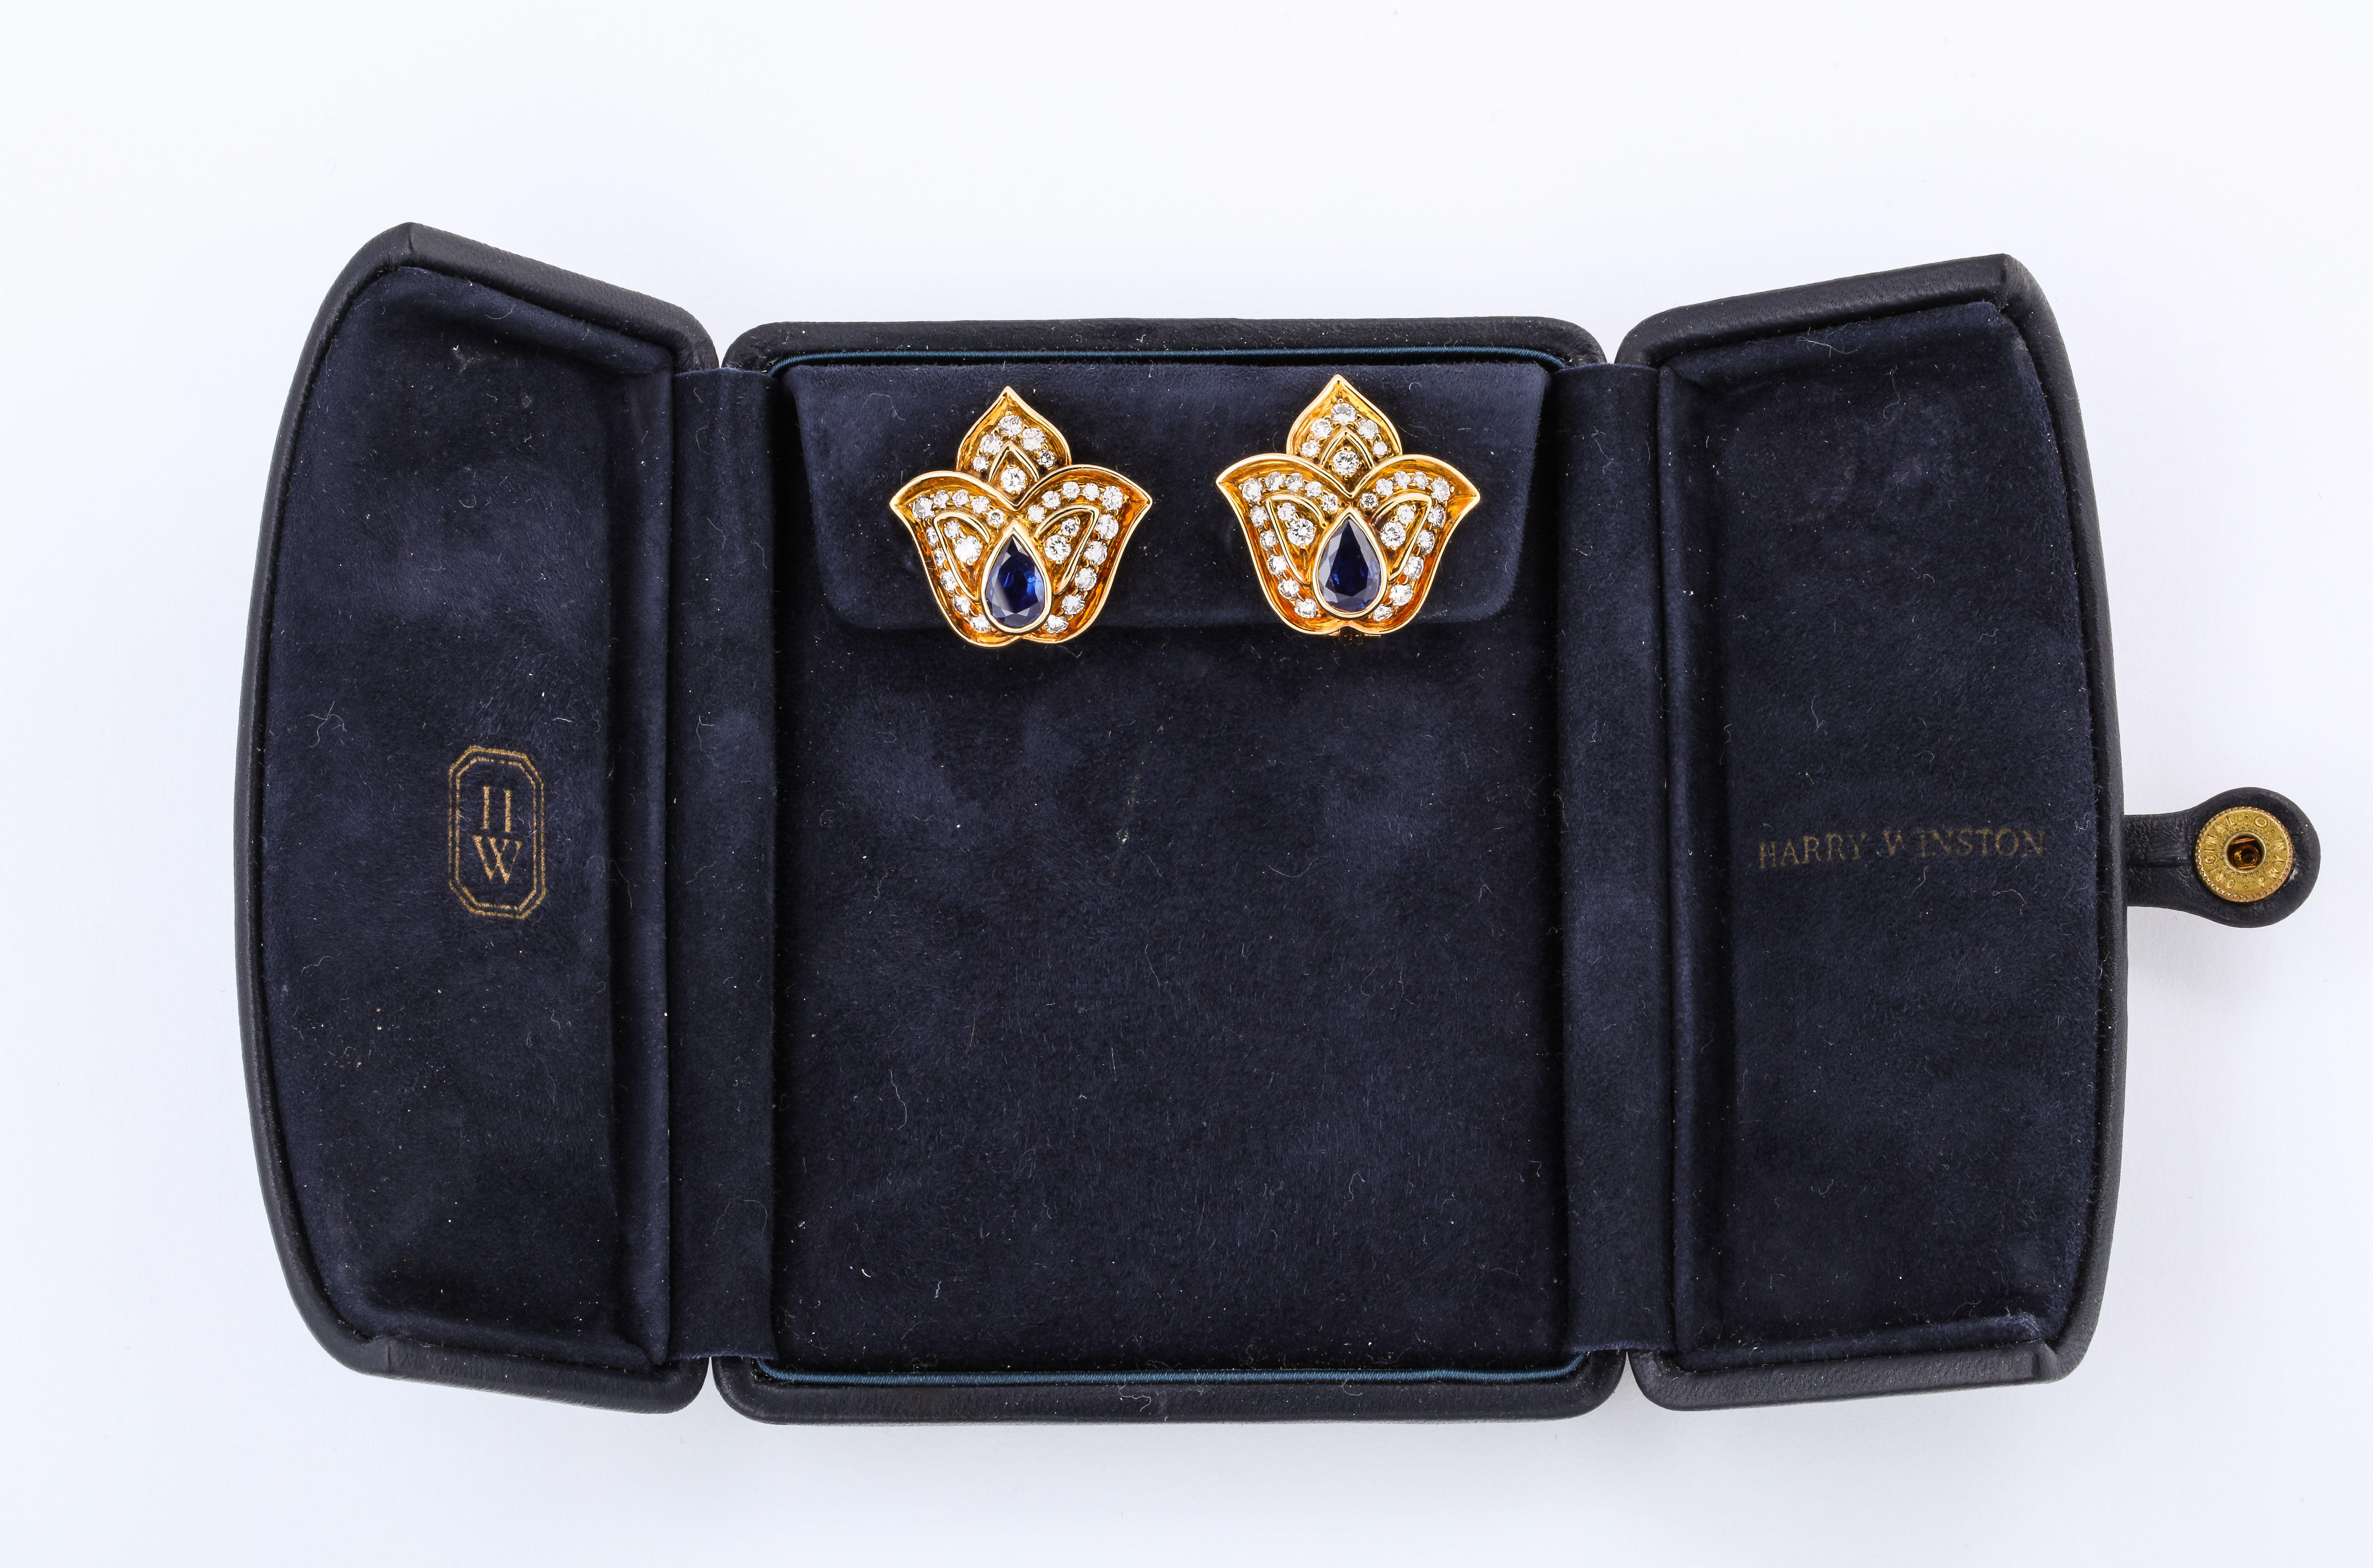 This lovely pair of Harry Winston Sapphire Diamond Yellow Gold Tulip Clip Earrings is offered here in their original case. They are composed of 2 pear shaped sapphires and Fine White Full Cut Diamonds, and are set in 18k Yellow Gold.

Materials:
18k